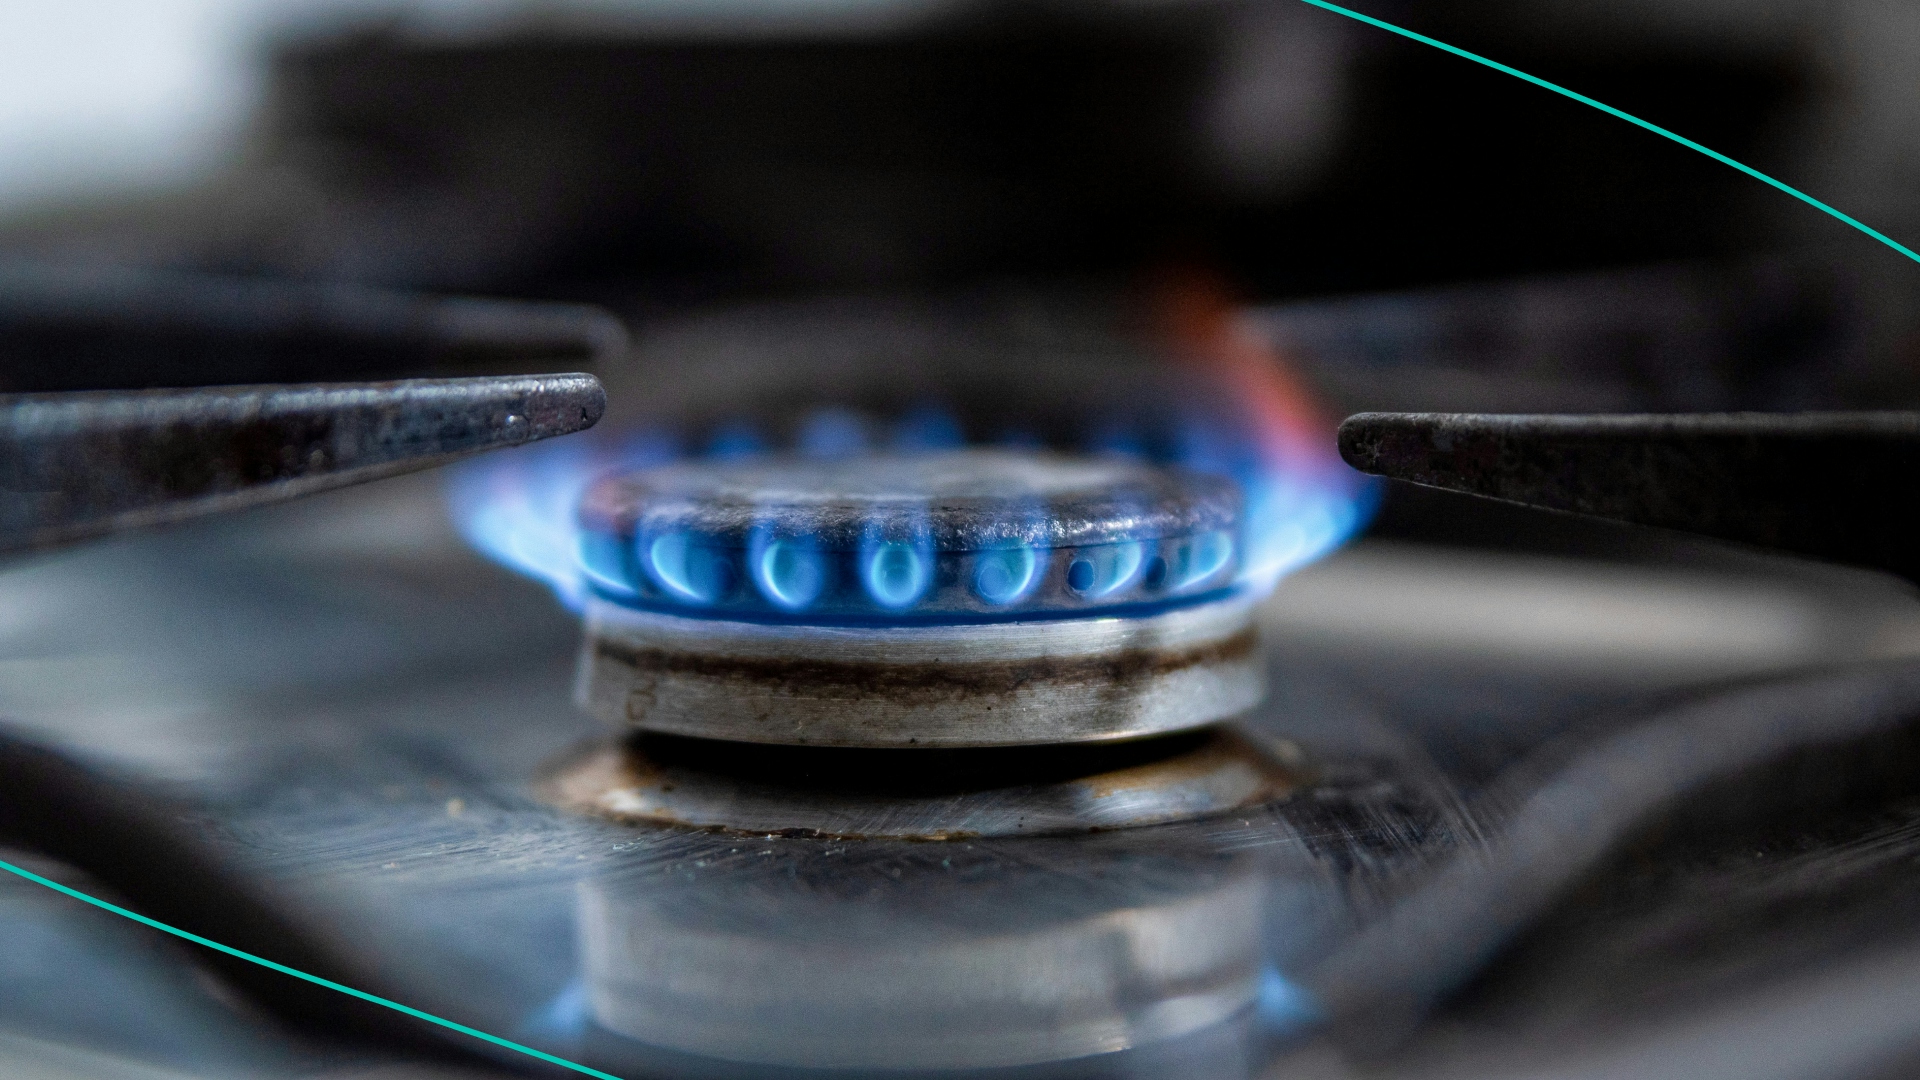 A gas stove lets off a blue flame inside a household kitchen 